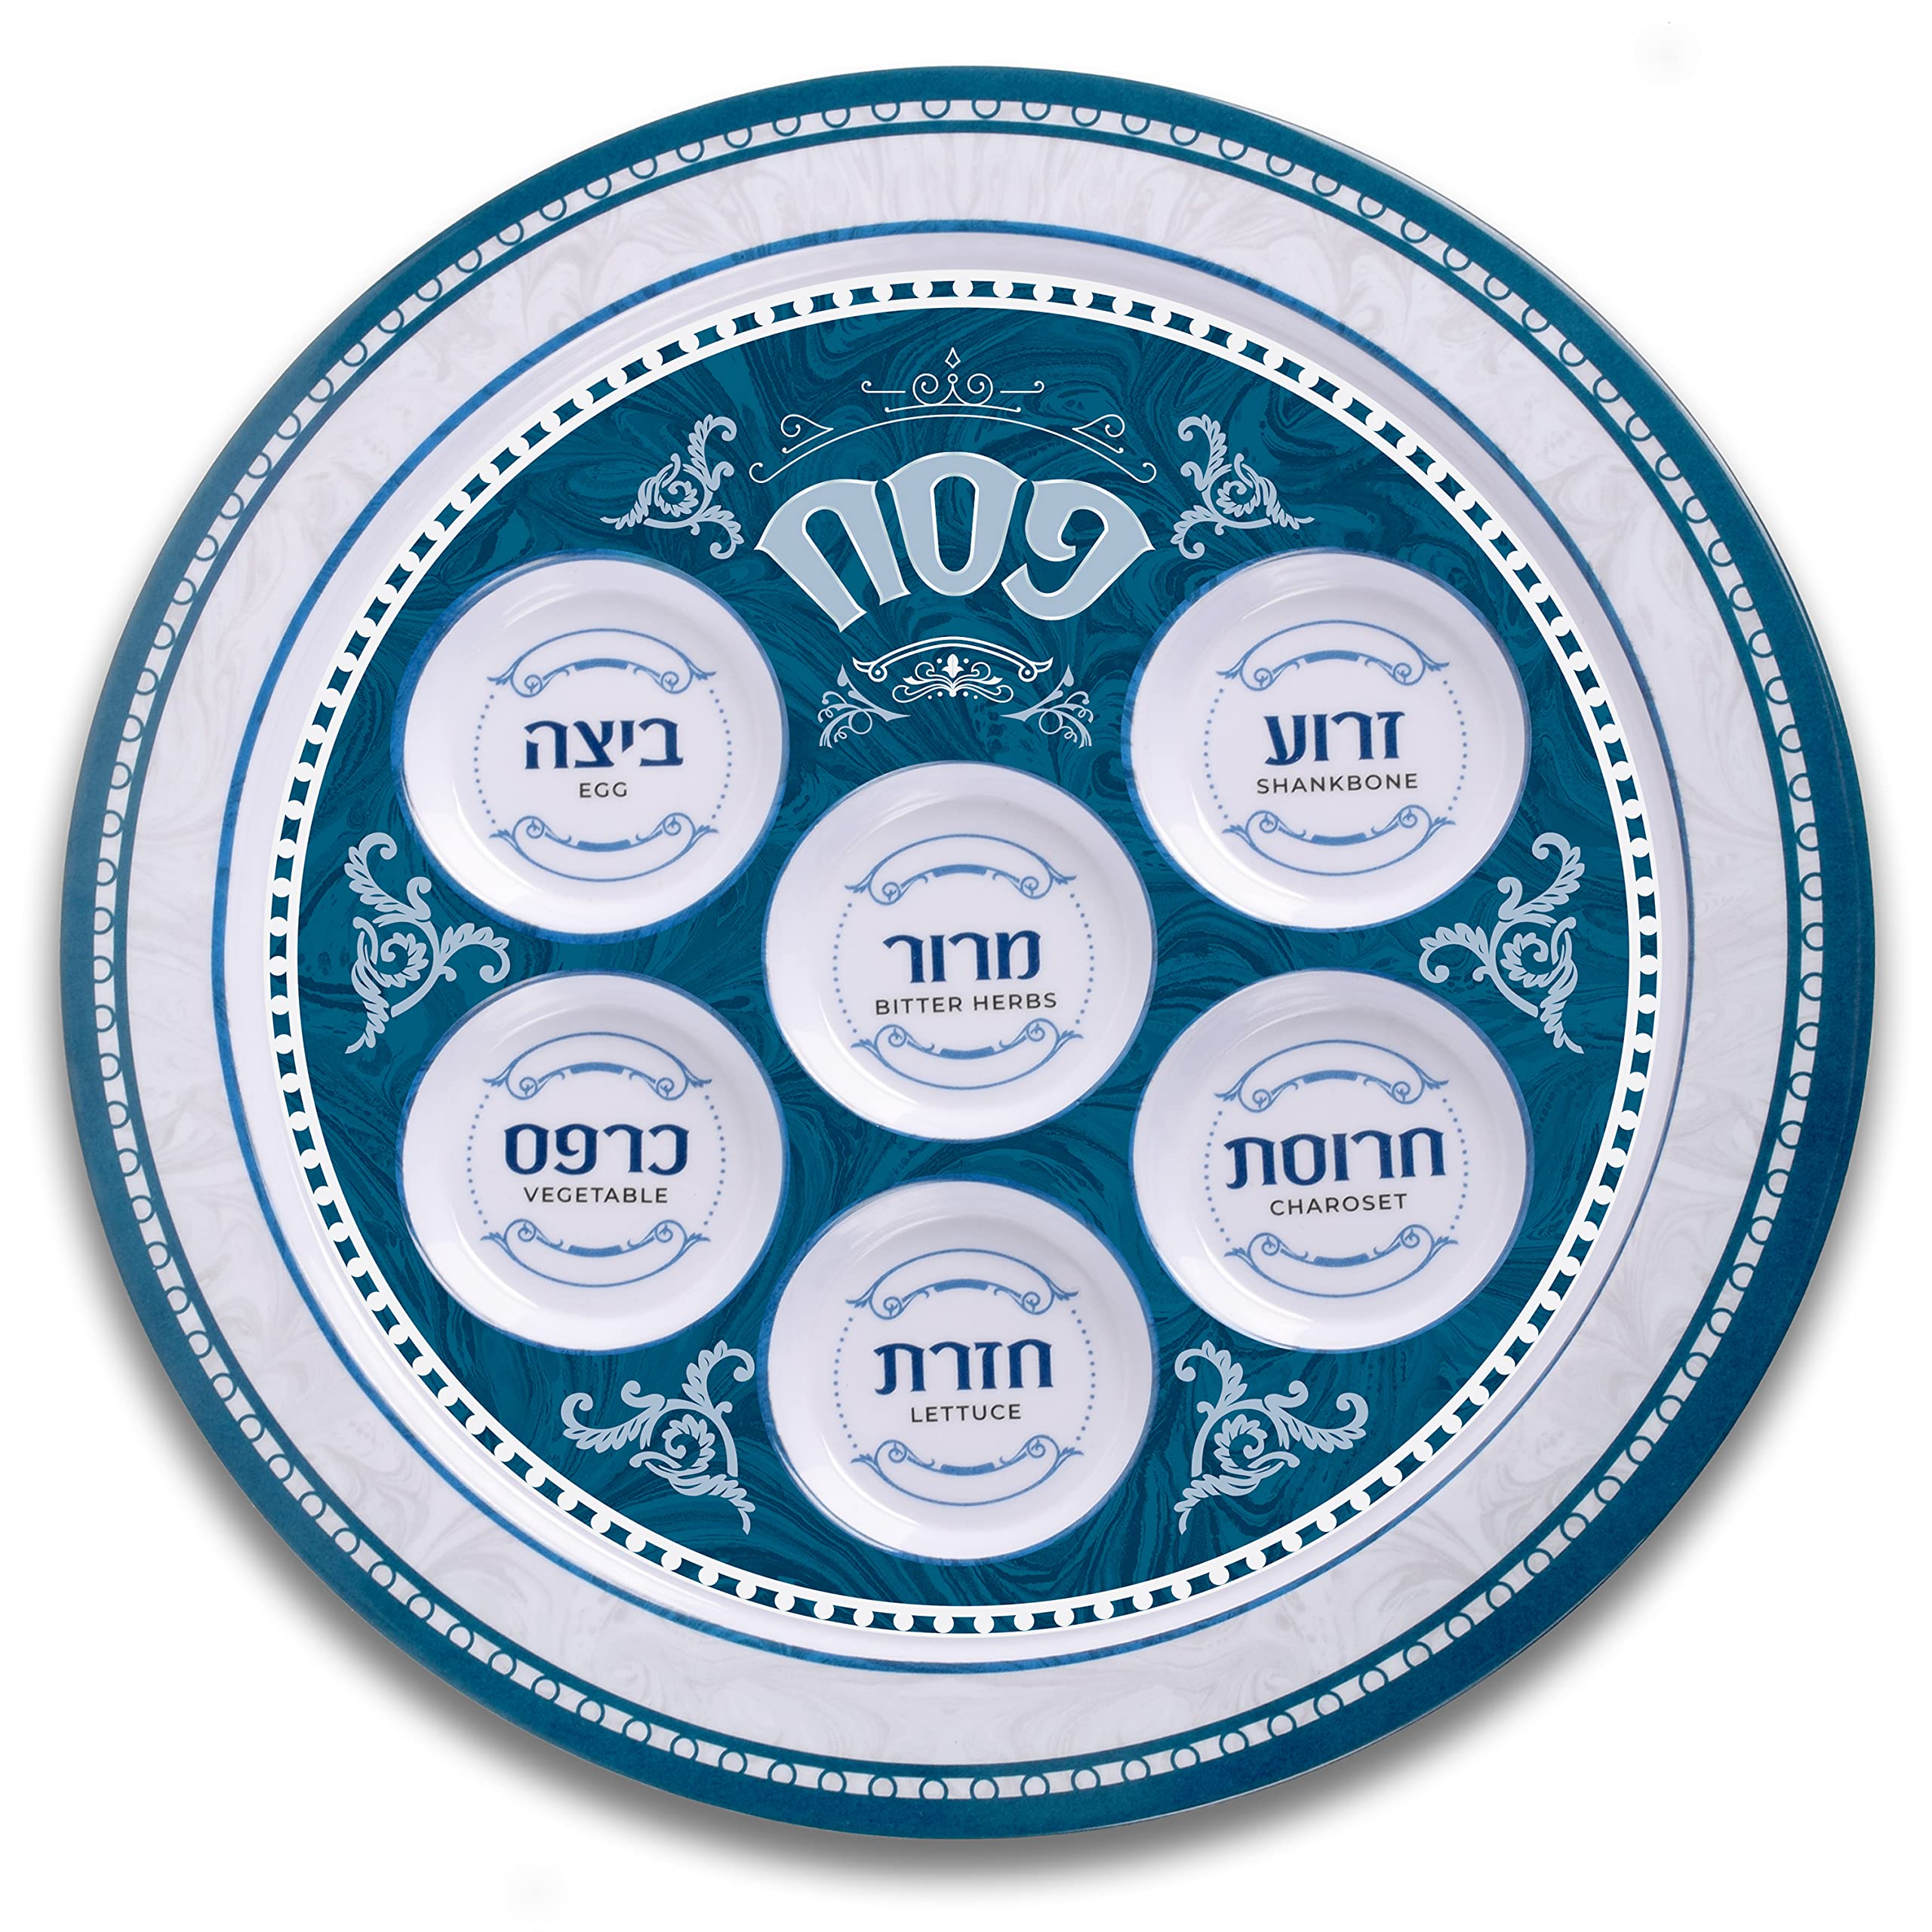 Ner Mitzvah Seder Plate for Passover - Melamine 12" Passover Seder Plate - Blue and White Marble Design Passover Plate